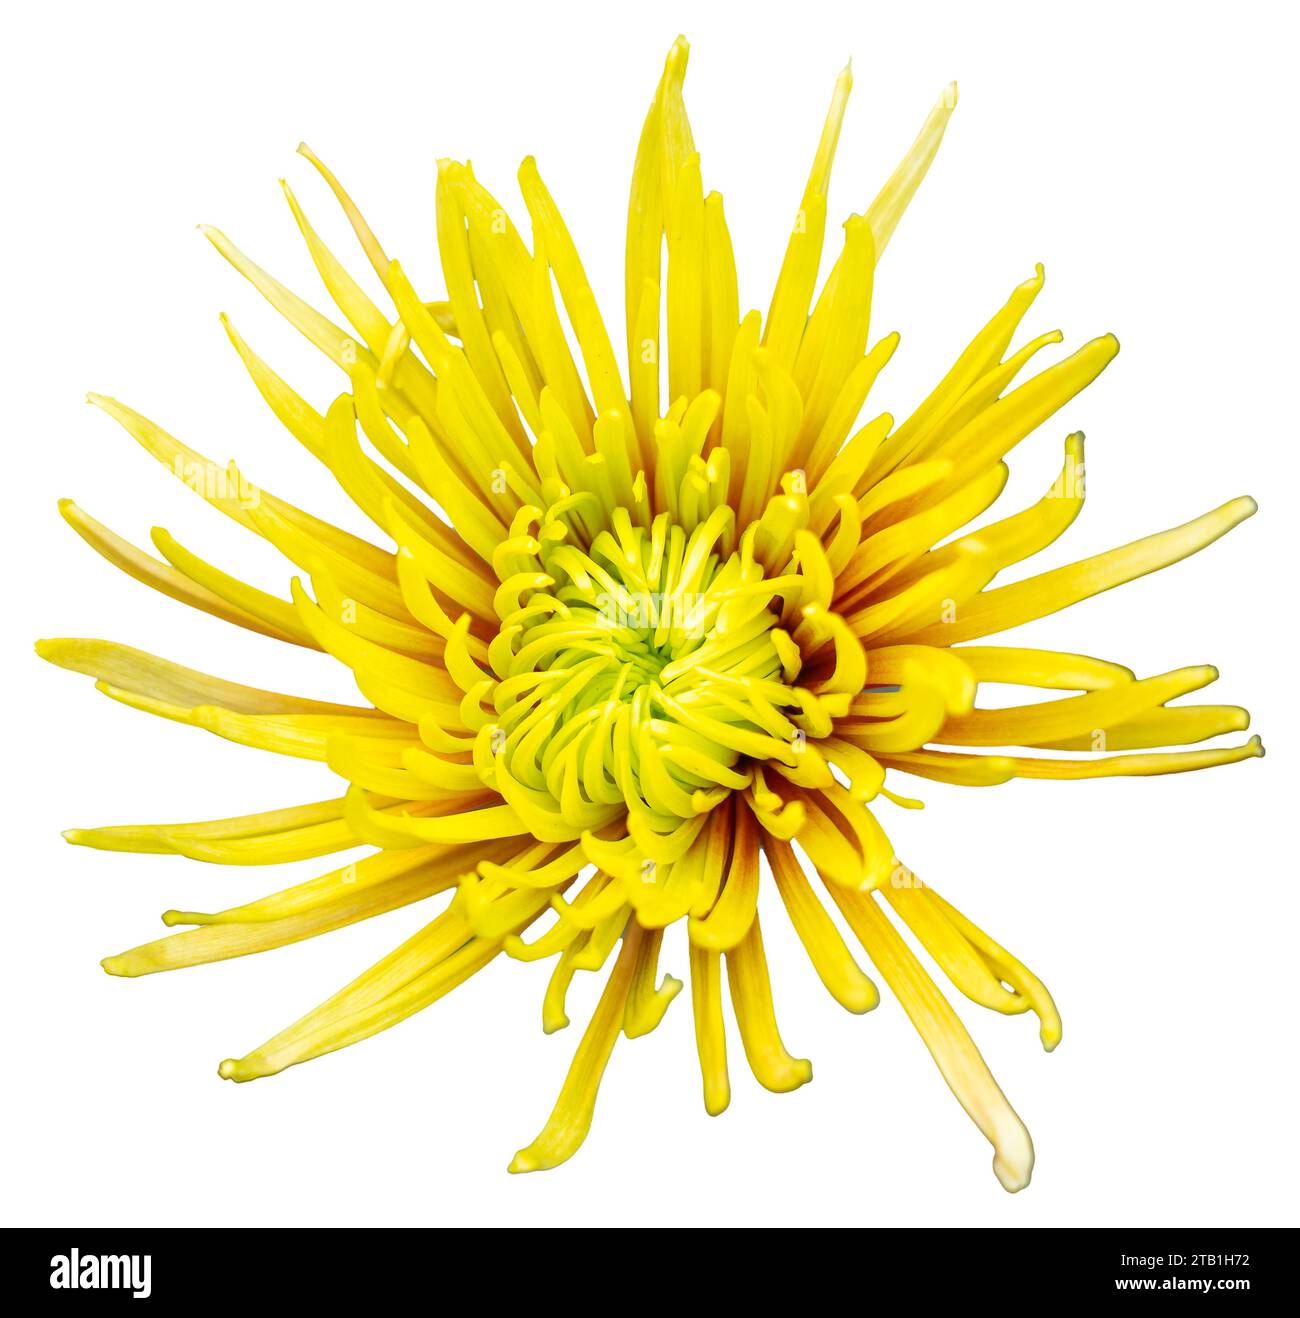 Top view of a yellow and brown flower with petals like radiant rays. Isolate a large flower with clipping path. Taipei Chrysanthemum Exhibition. Stock Photo